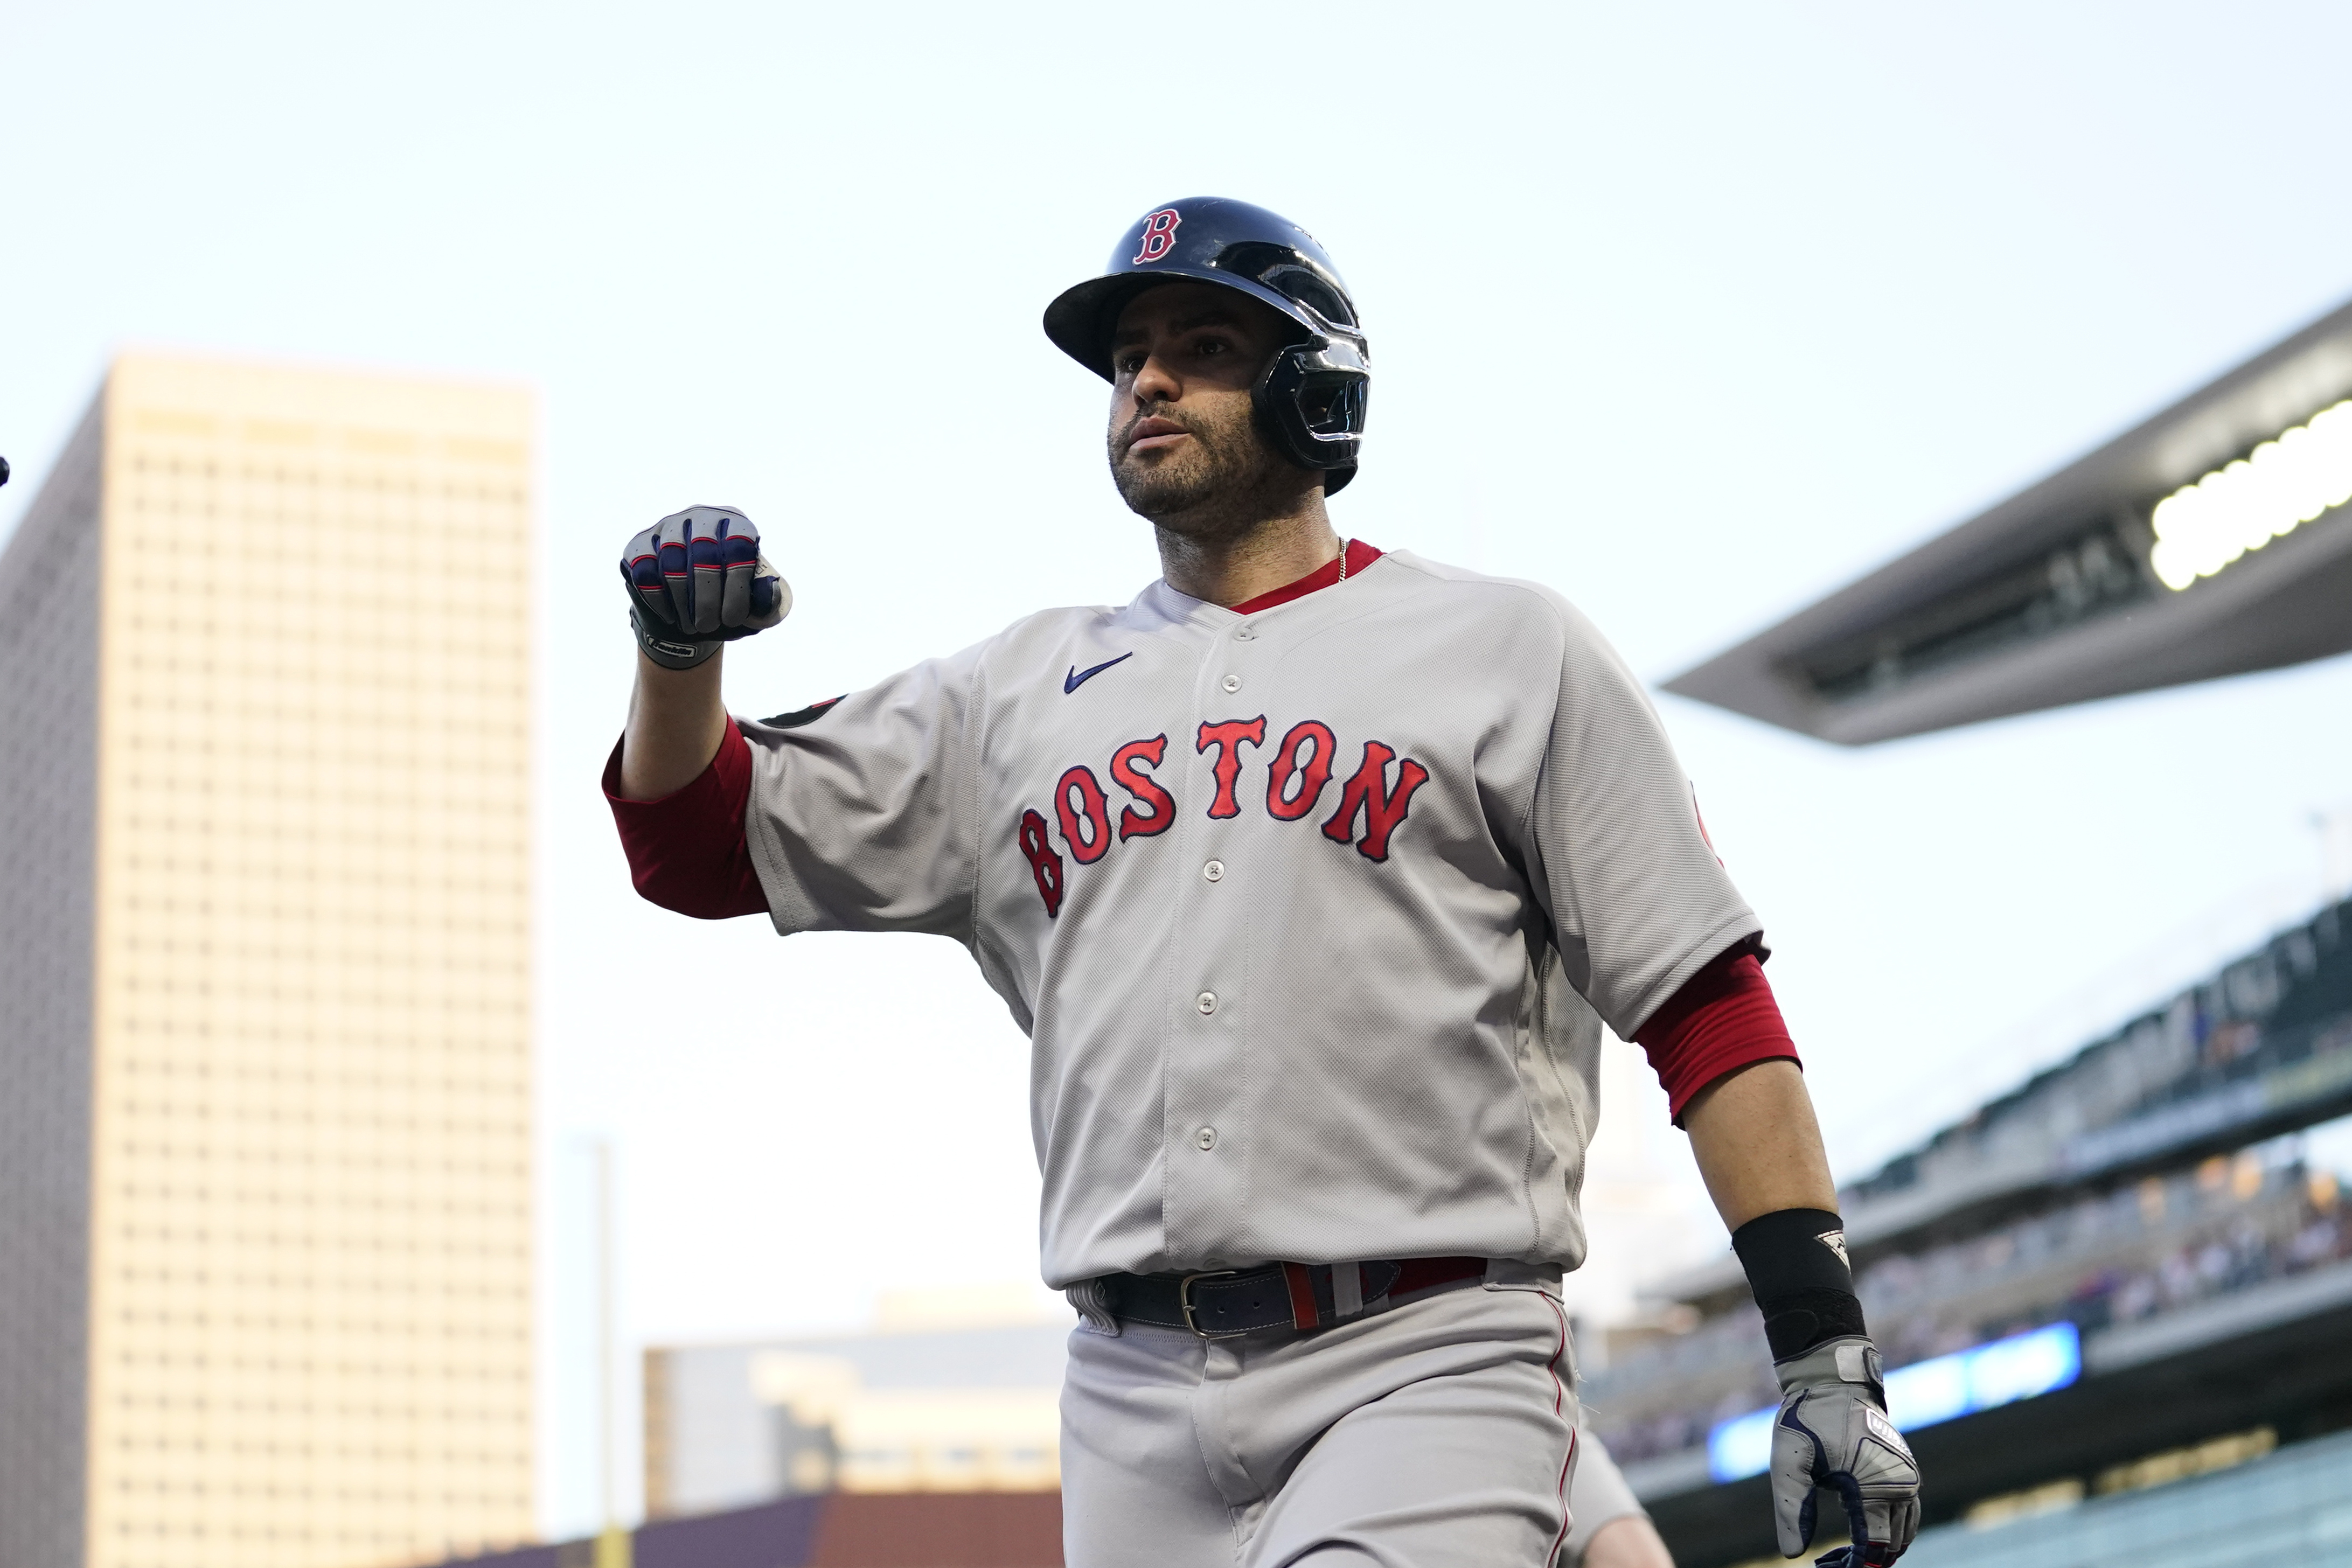 Reese McGuire catching in Boston Red Sox debut Wednesday, J.D. Martinez out  of lineup; Christian Vázquez starts for Astros 